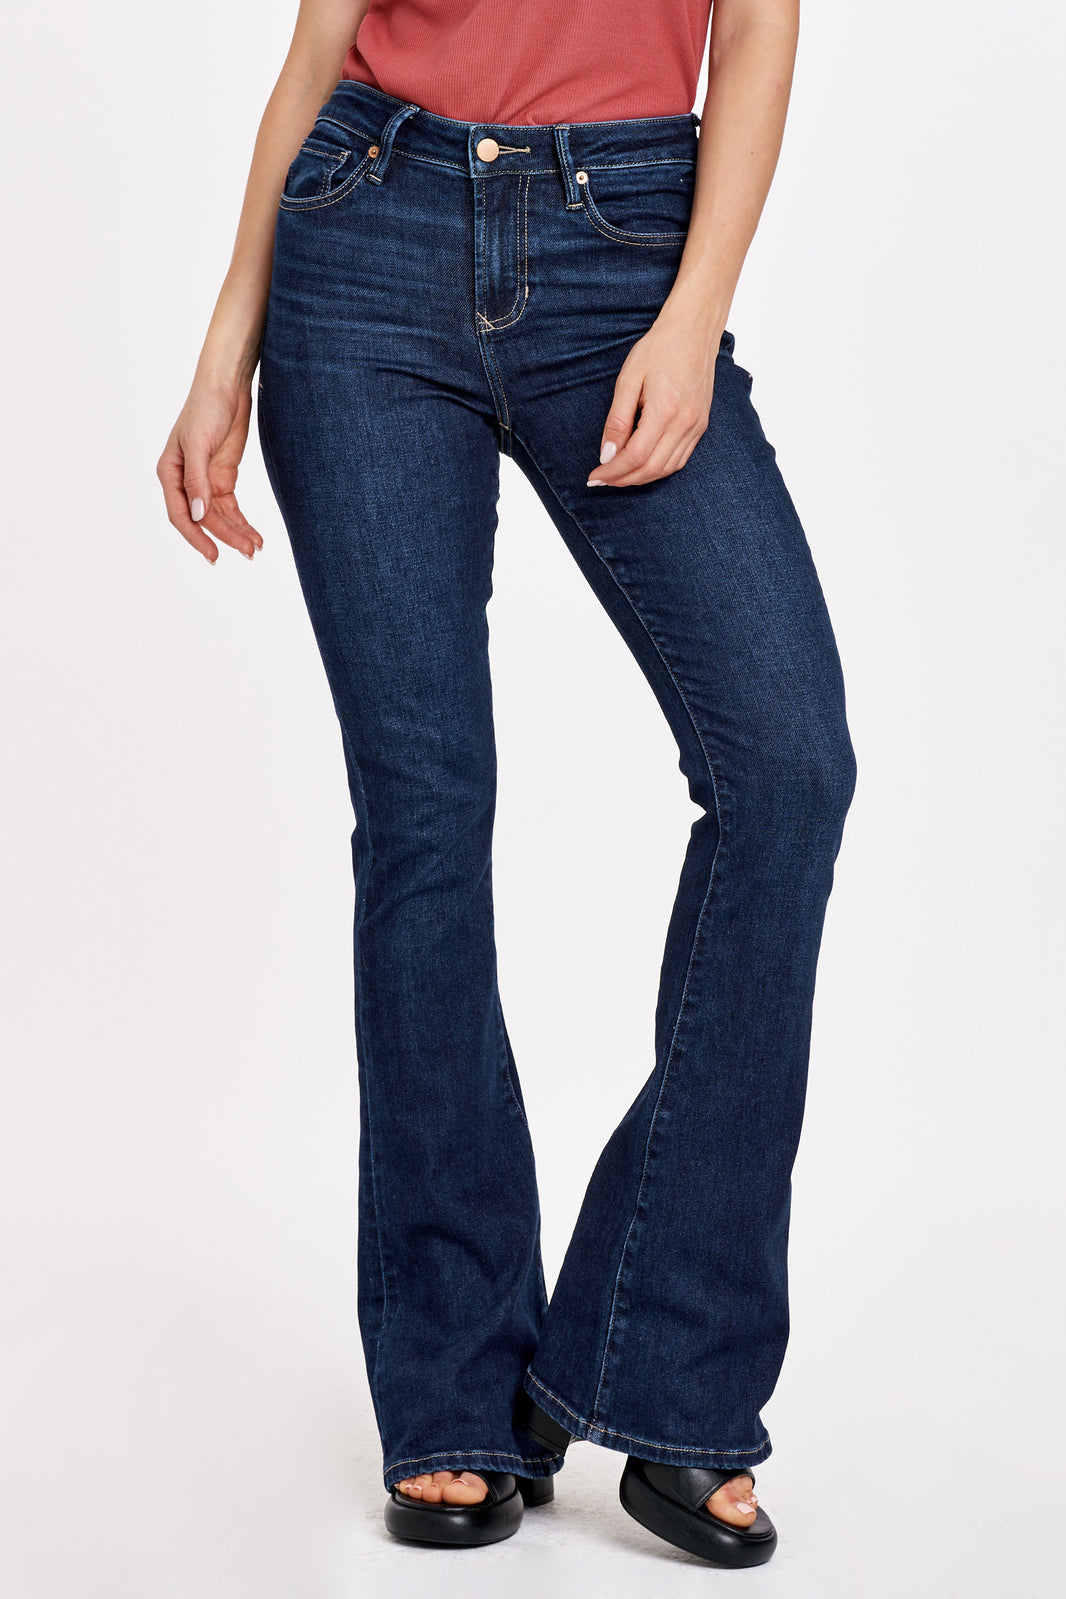 Jeans and Pants – Brazos Avenue Market